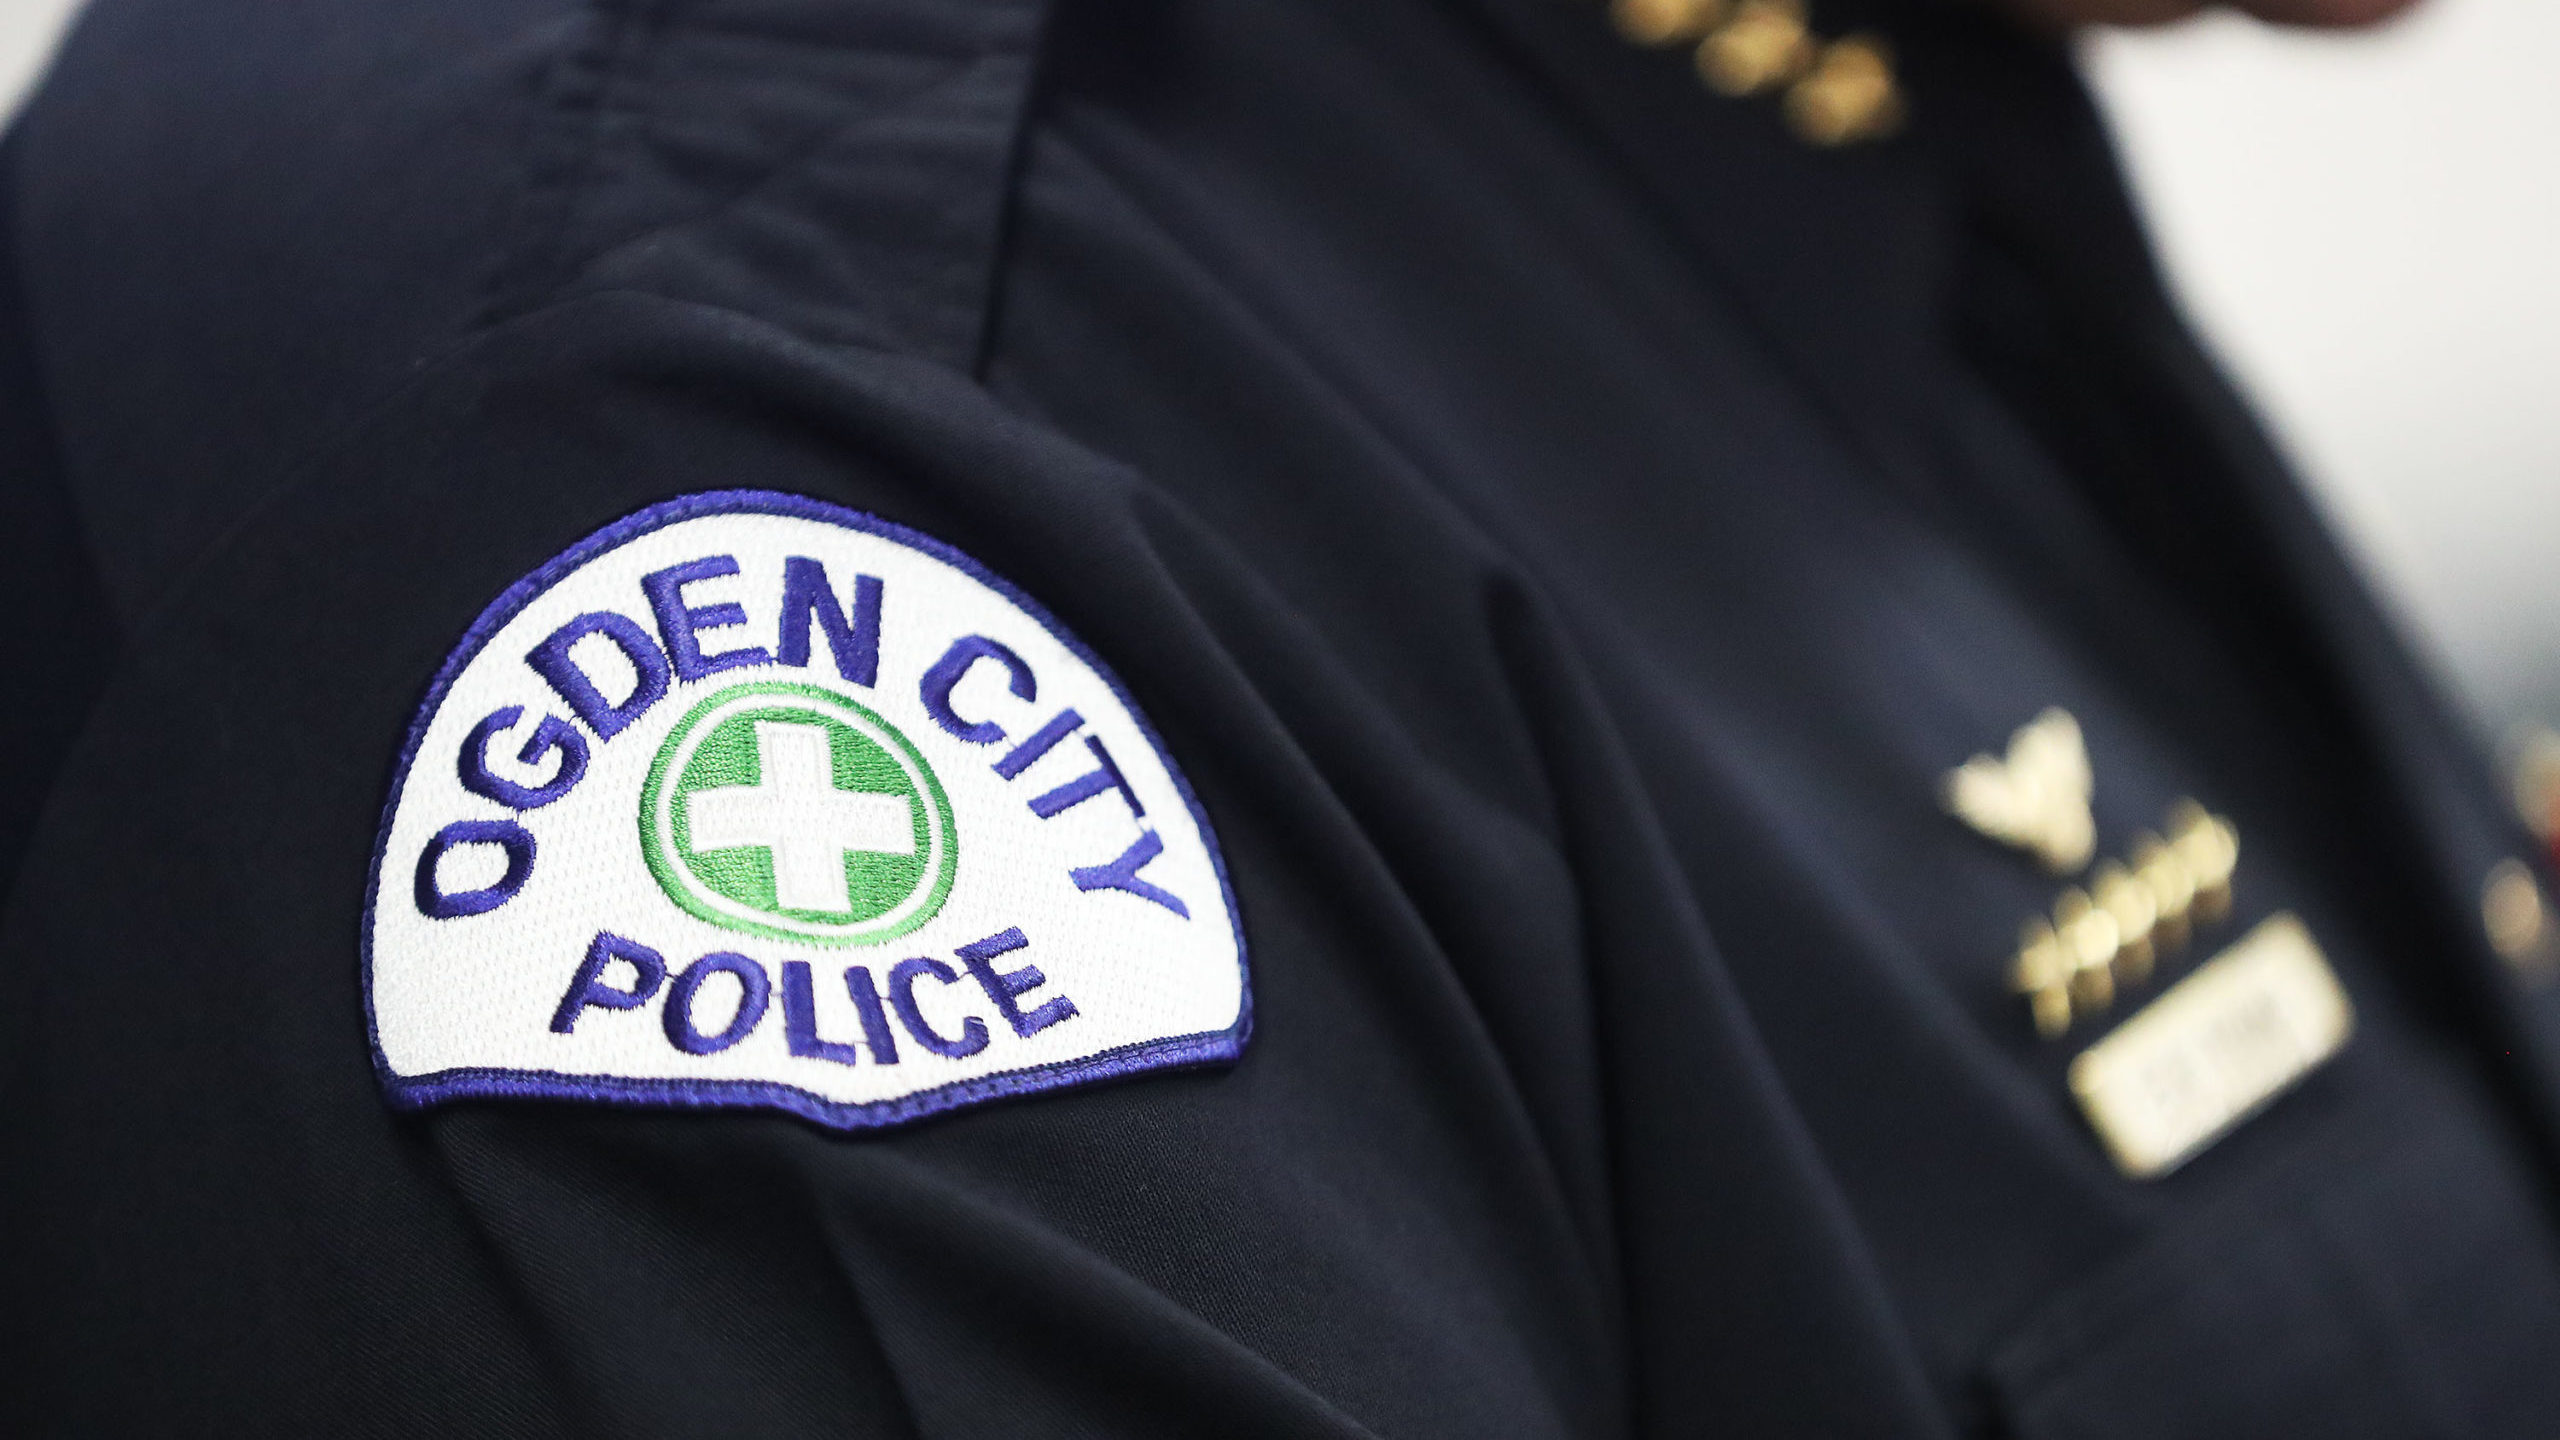 An "ogden city police" patch is pictured...